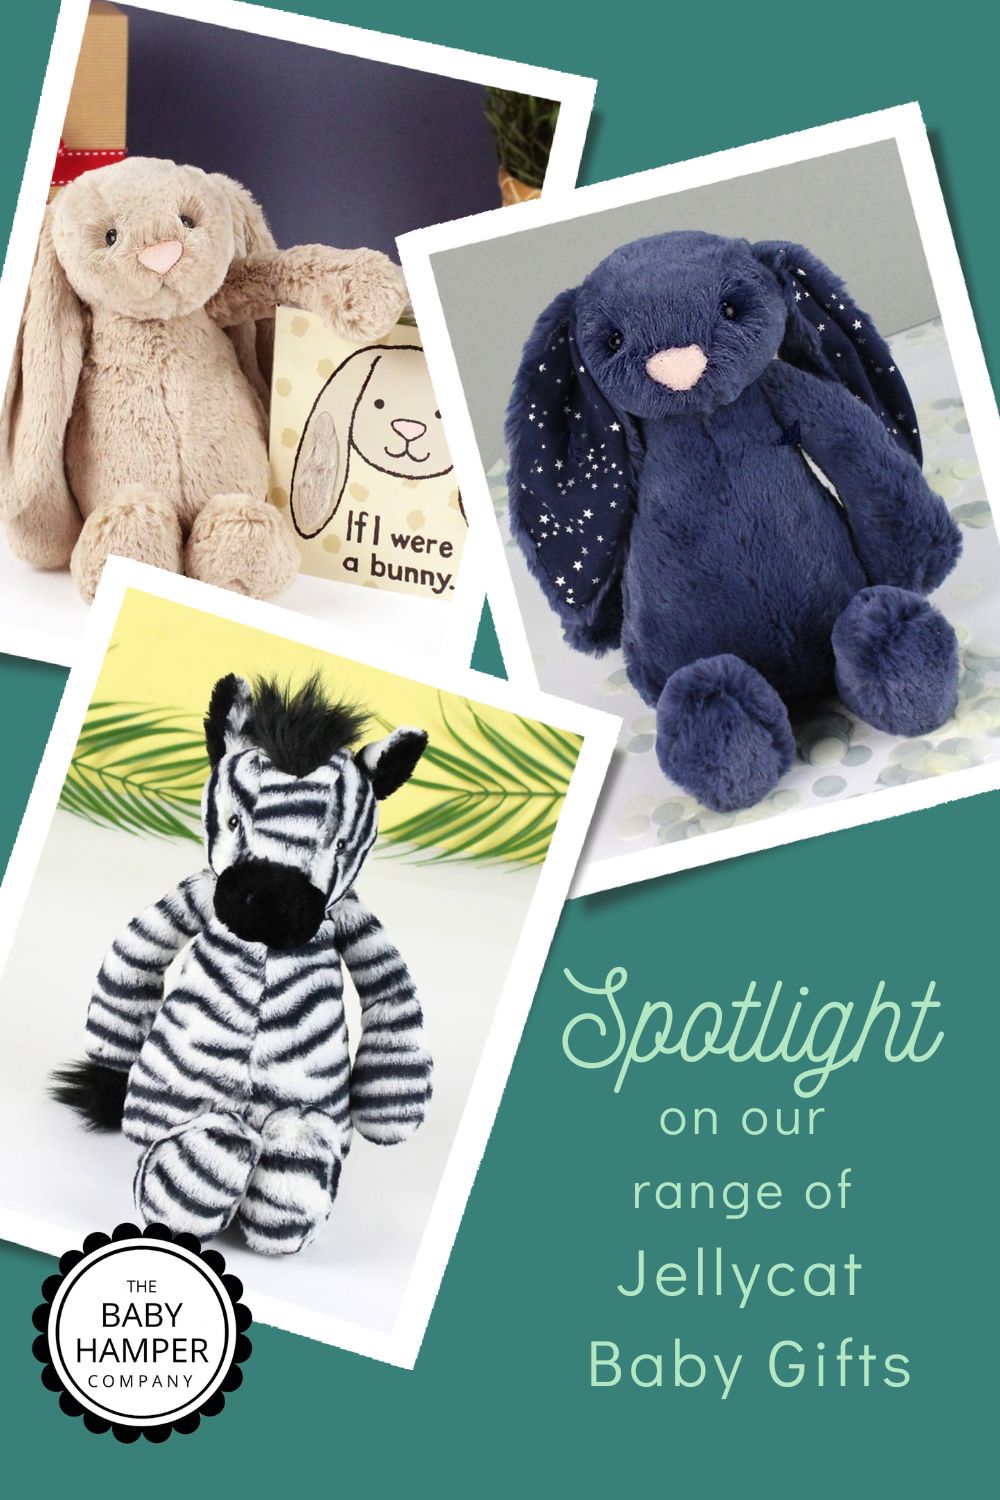 Spotlight On Our Range of Jellycat Baby gifts